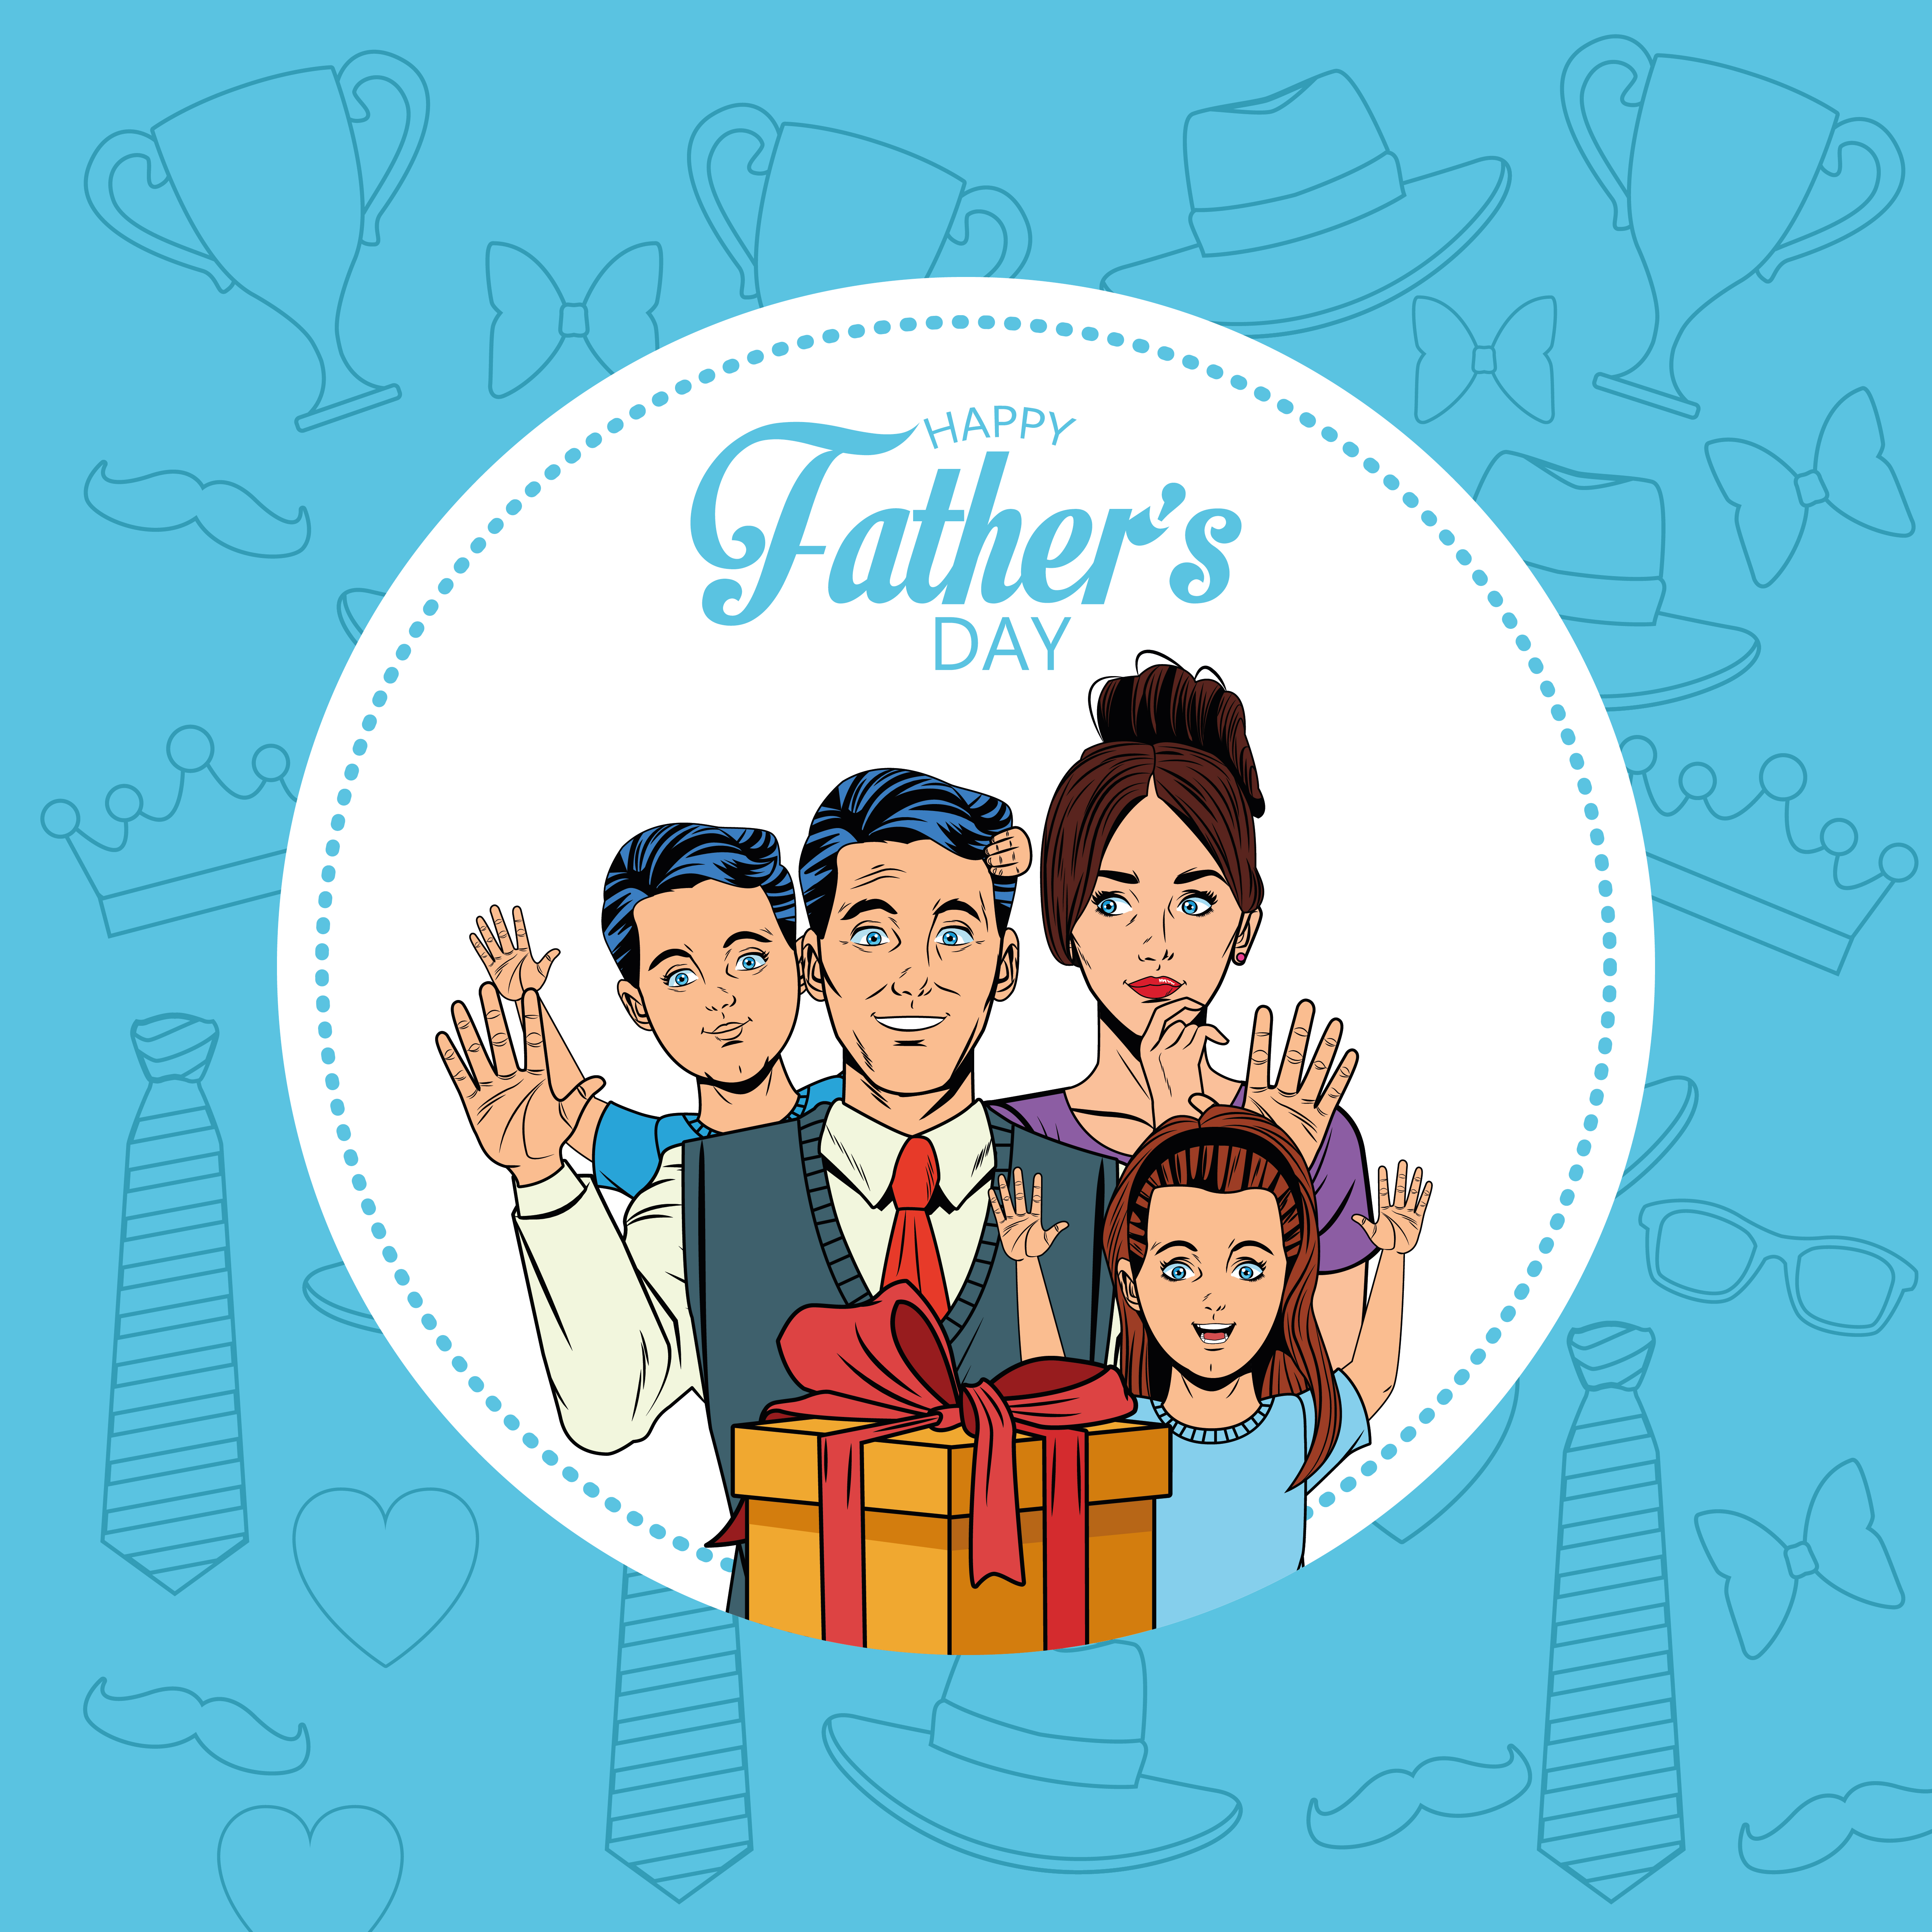 Download Happy fathers day card 657385 - Download Free Vectors ...